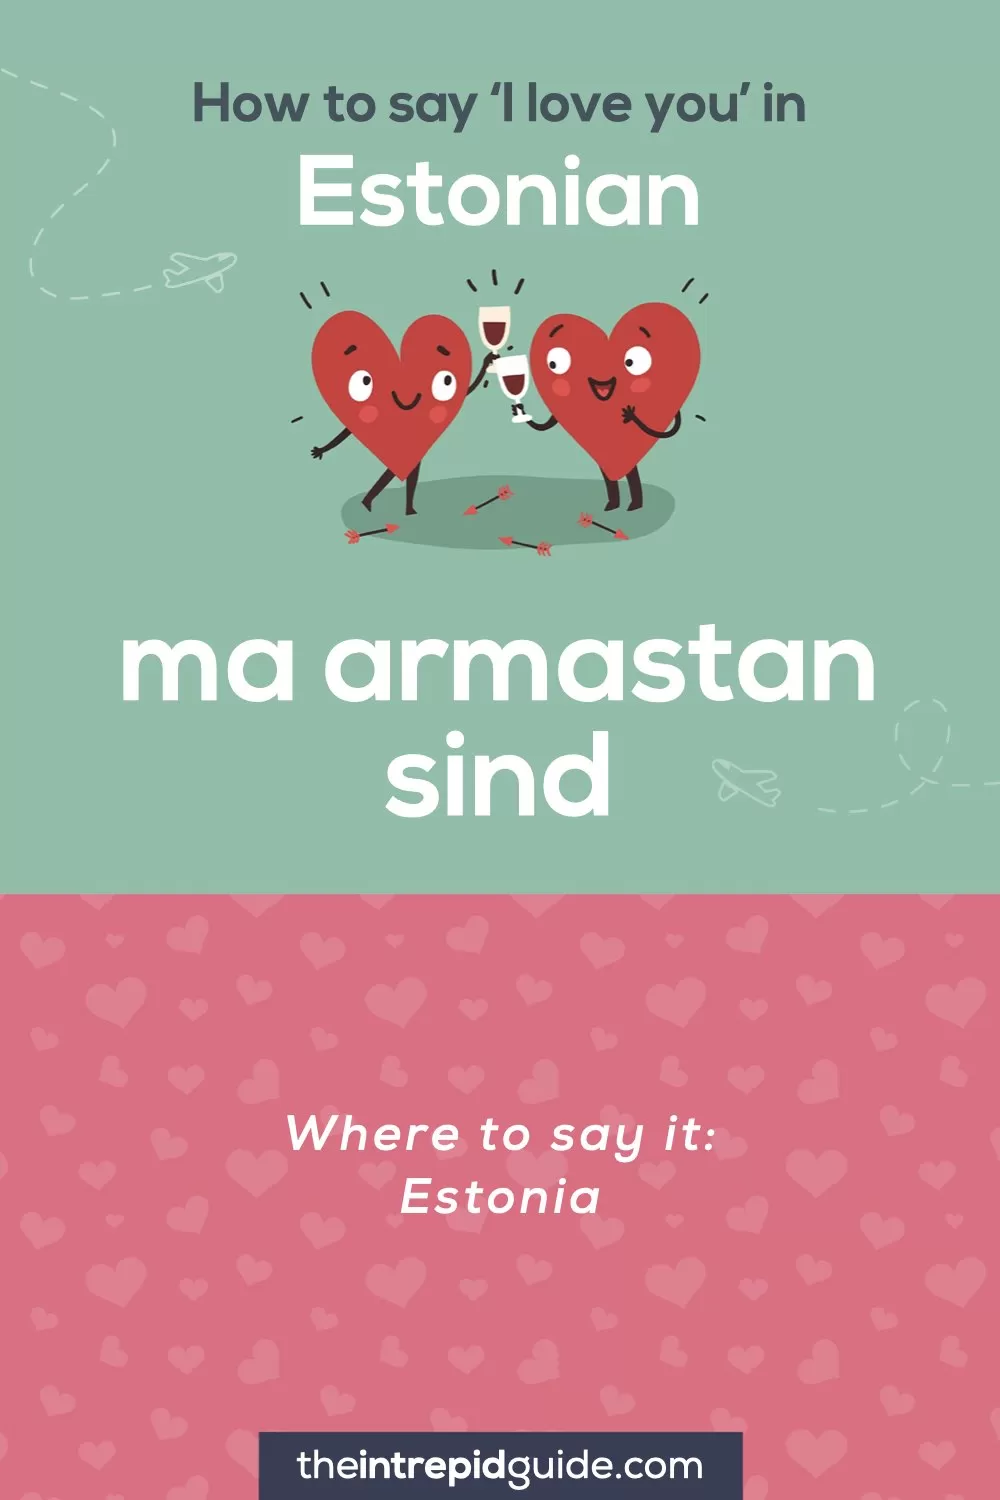 How to say I love you in different languages - Estonian - ma armastan sind